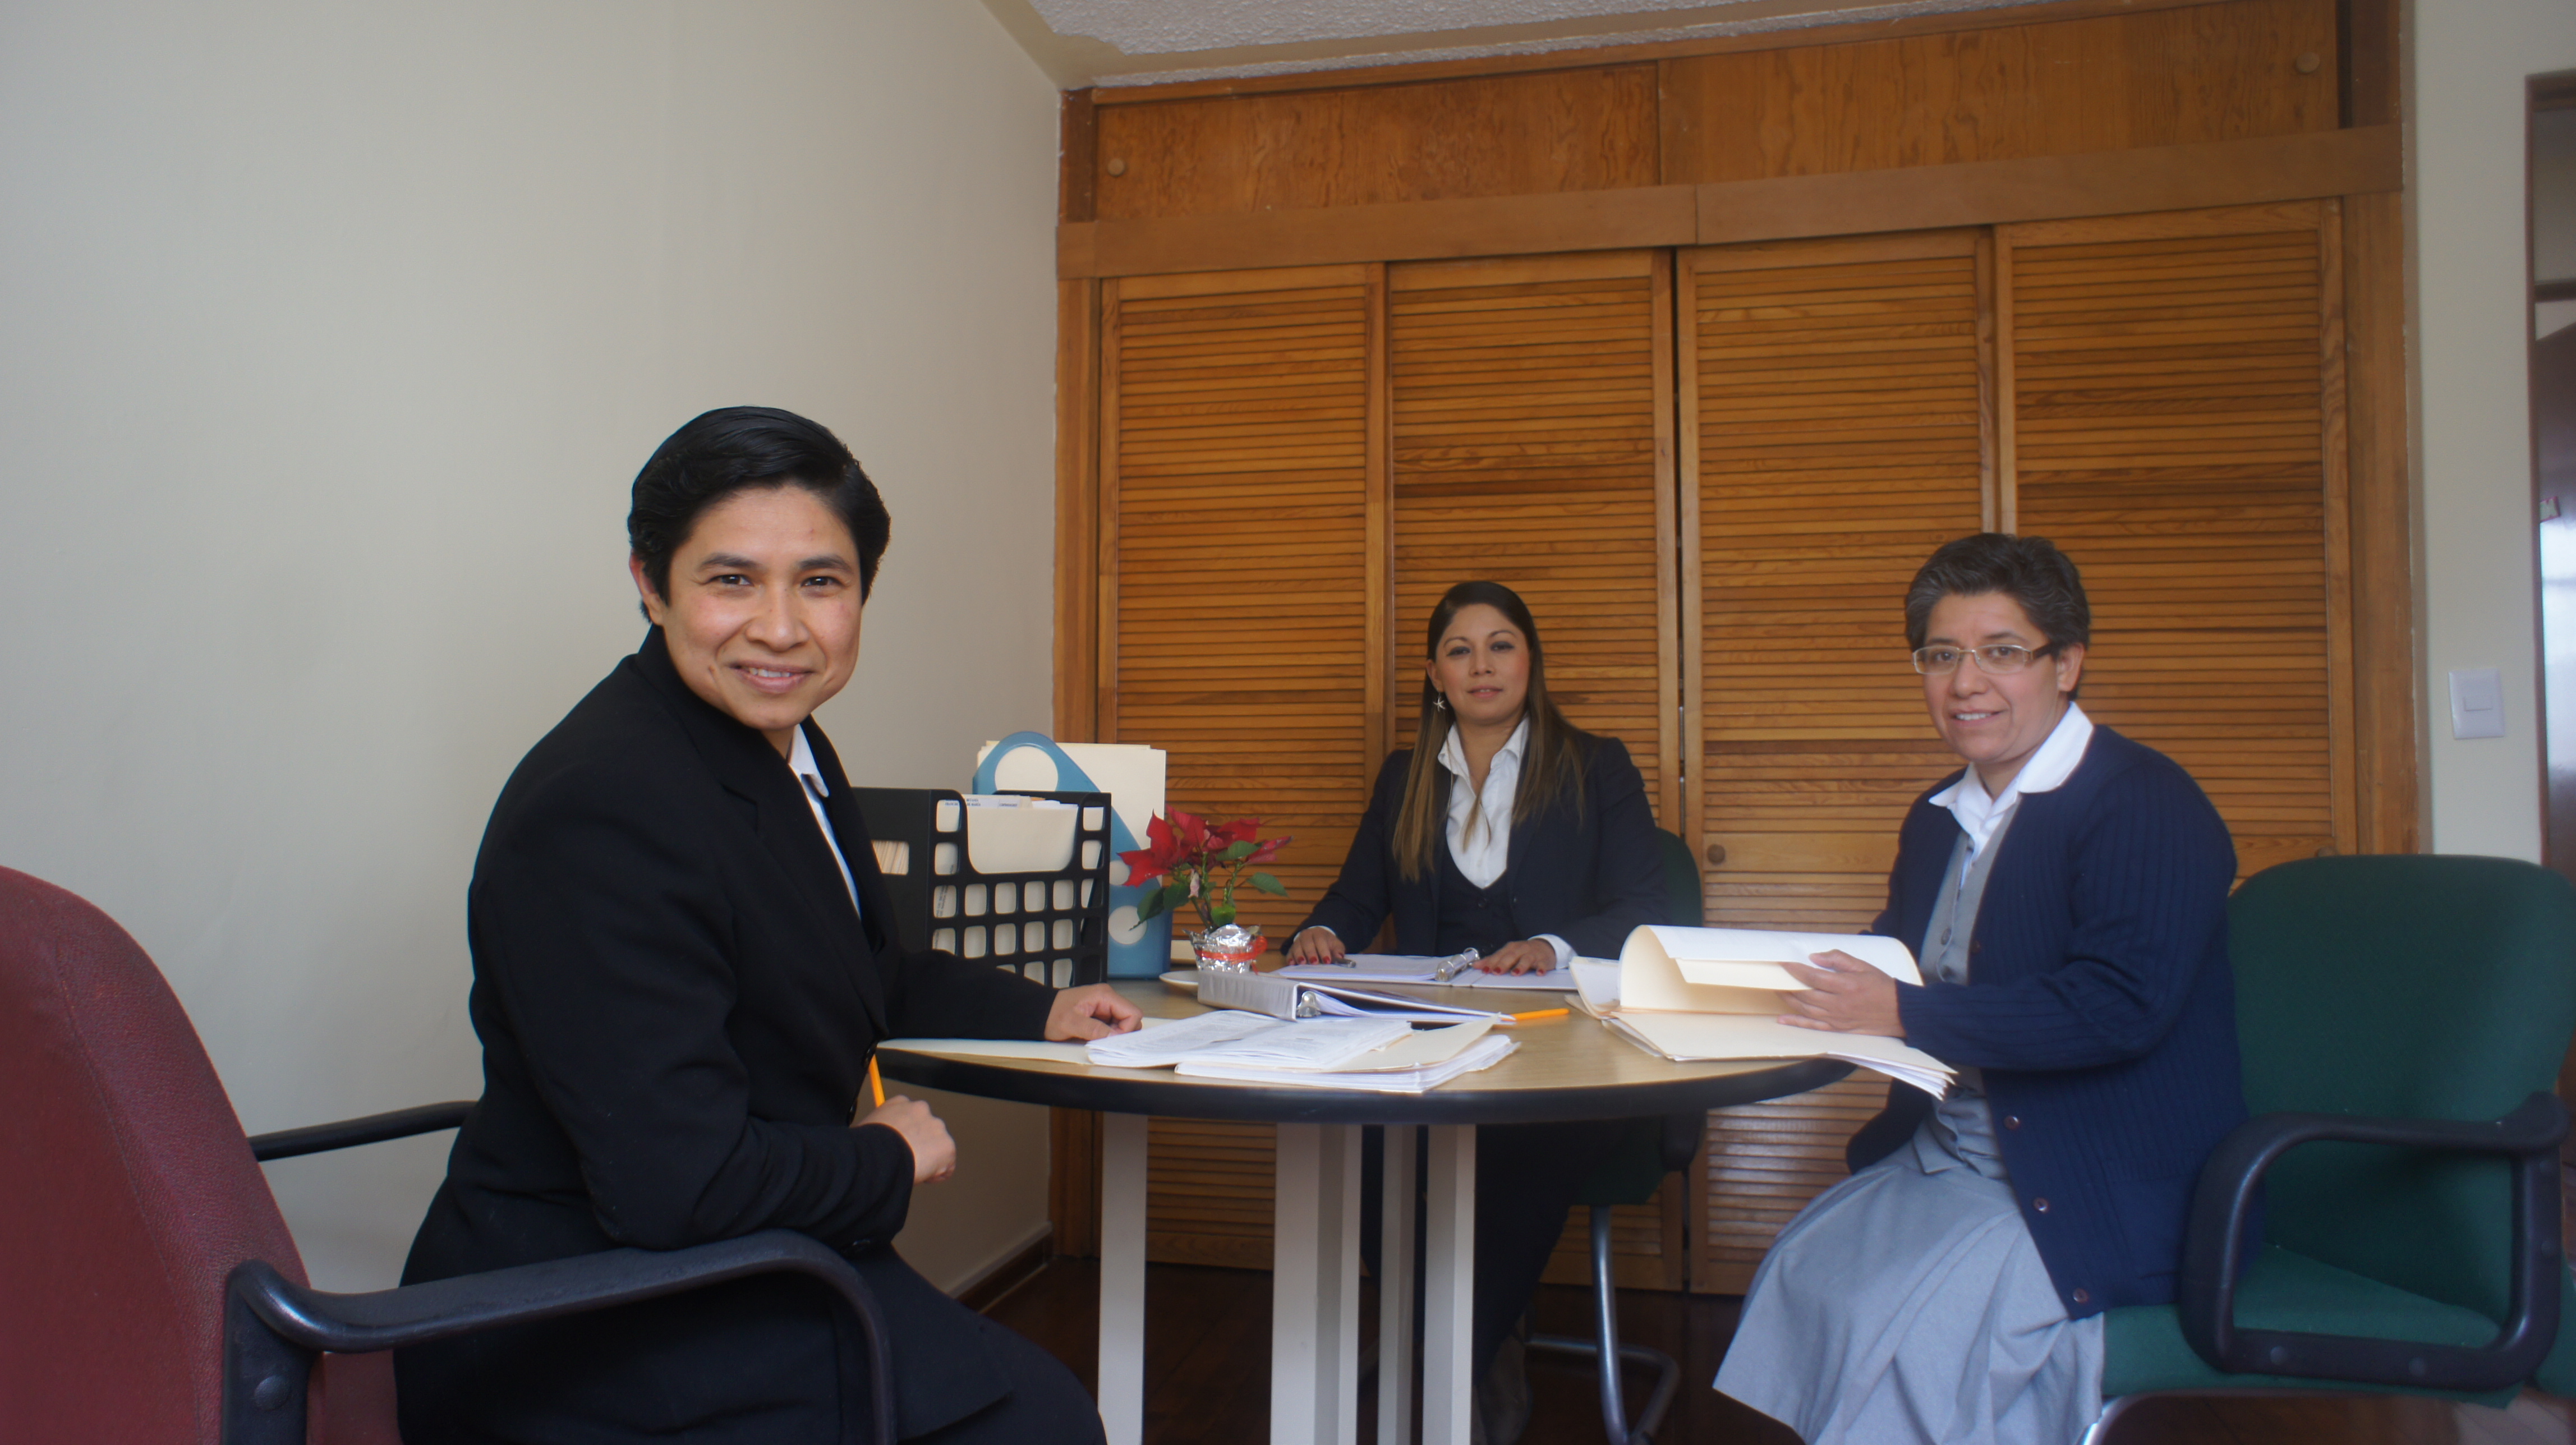 From left: Sr. Brenda Teresita Hernández Valdés, member of the Daughters of Mary Immaculate of Guadalupe; Katia Marlizeth Luna Salinas, executive director; and Sr. Soraida Moreno Sahagón, Daughter of Mary Help of Christians and in pastoral ministry for 24 years (Courtesy of Office for the Development and Integral Health for Women Religious in Mexico)